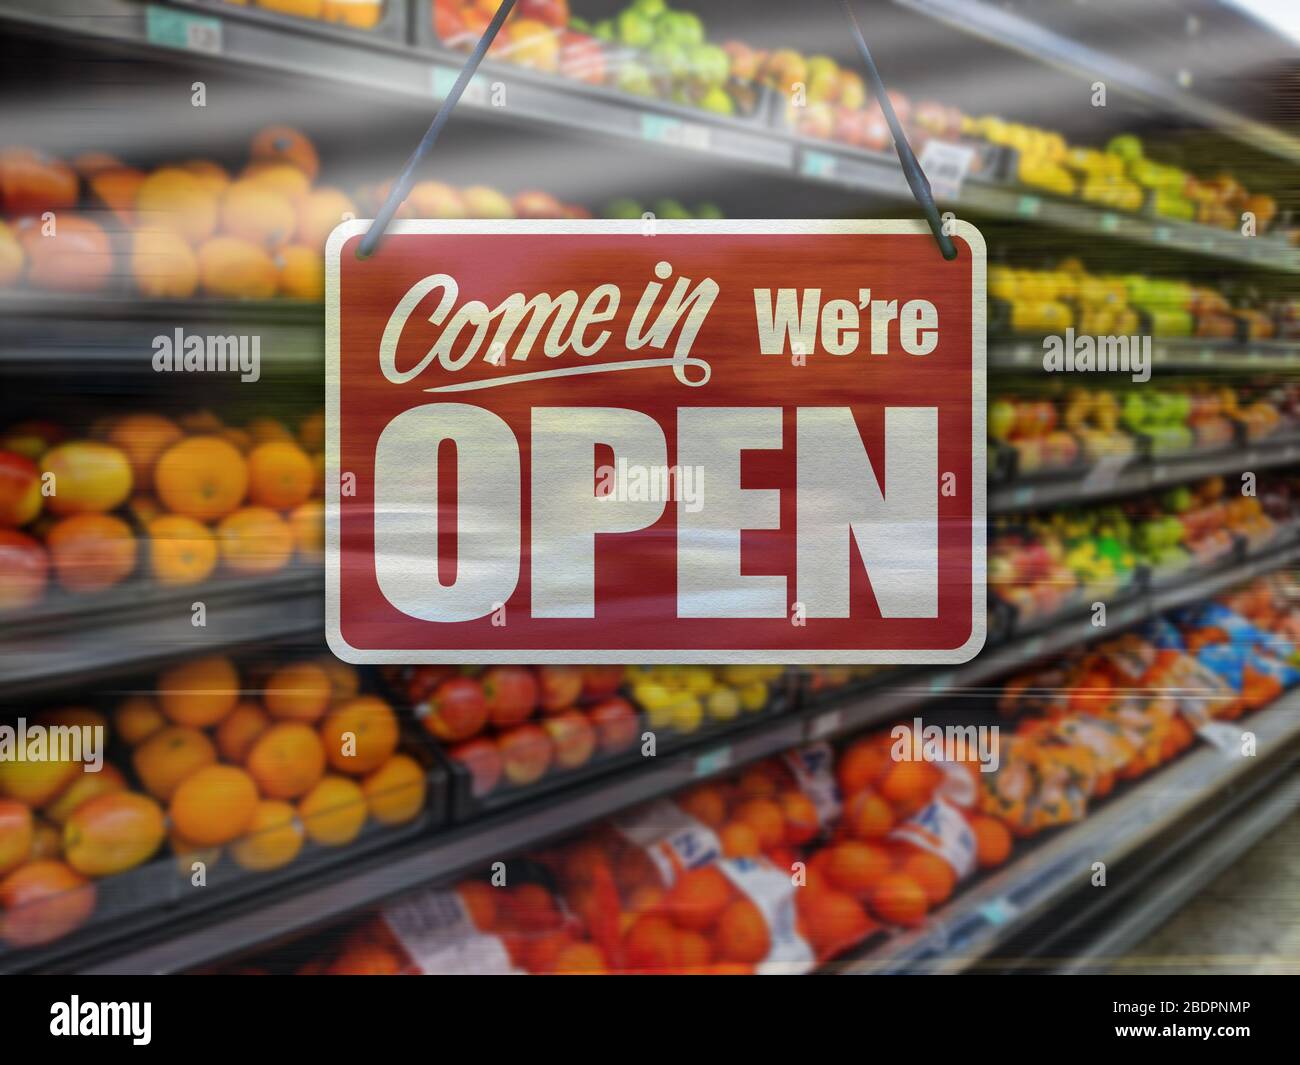 A business sign that says 'Come in We're Open' on supermarket or convenience store window. Stock Photo